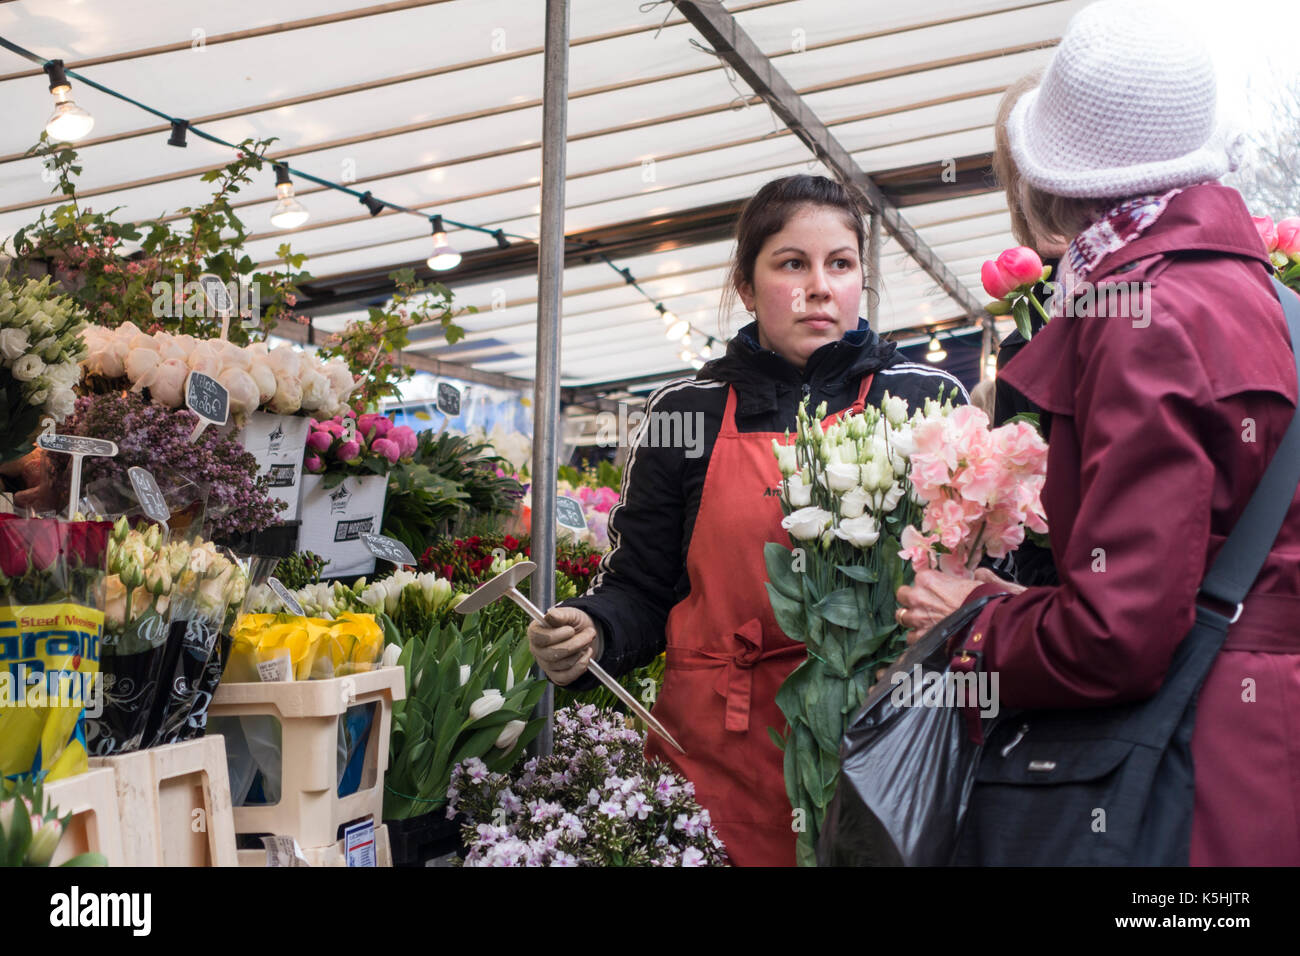 Vendor sells flowers to a customer at a flower stand at the Bastille market in Paris, France Stock Photo